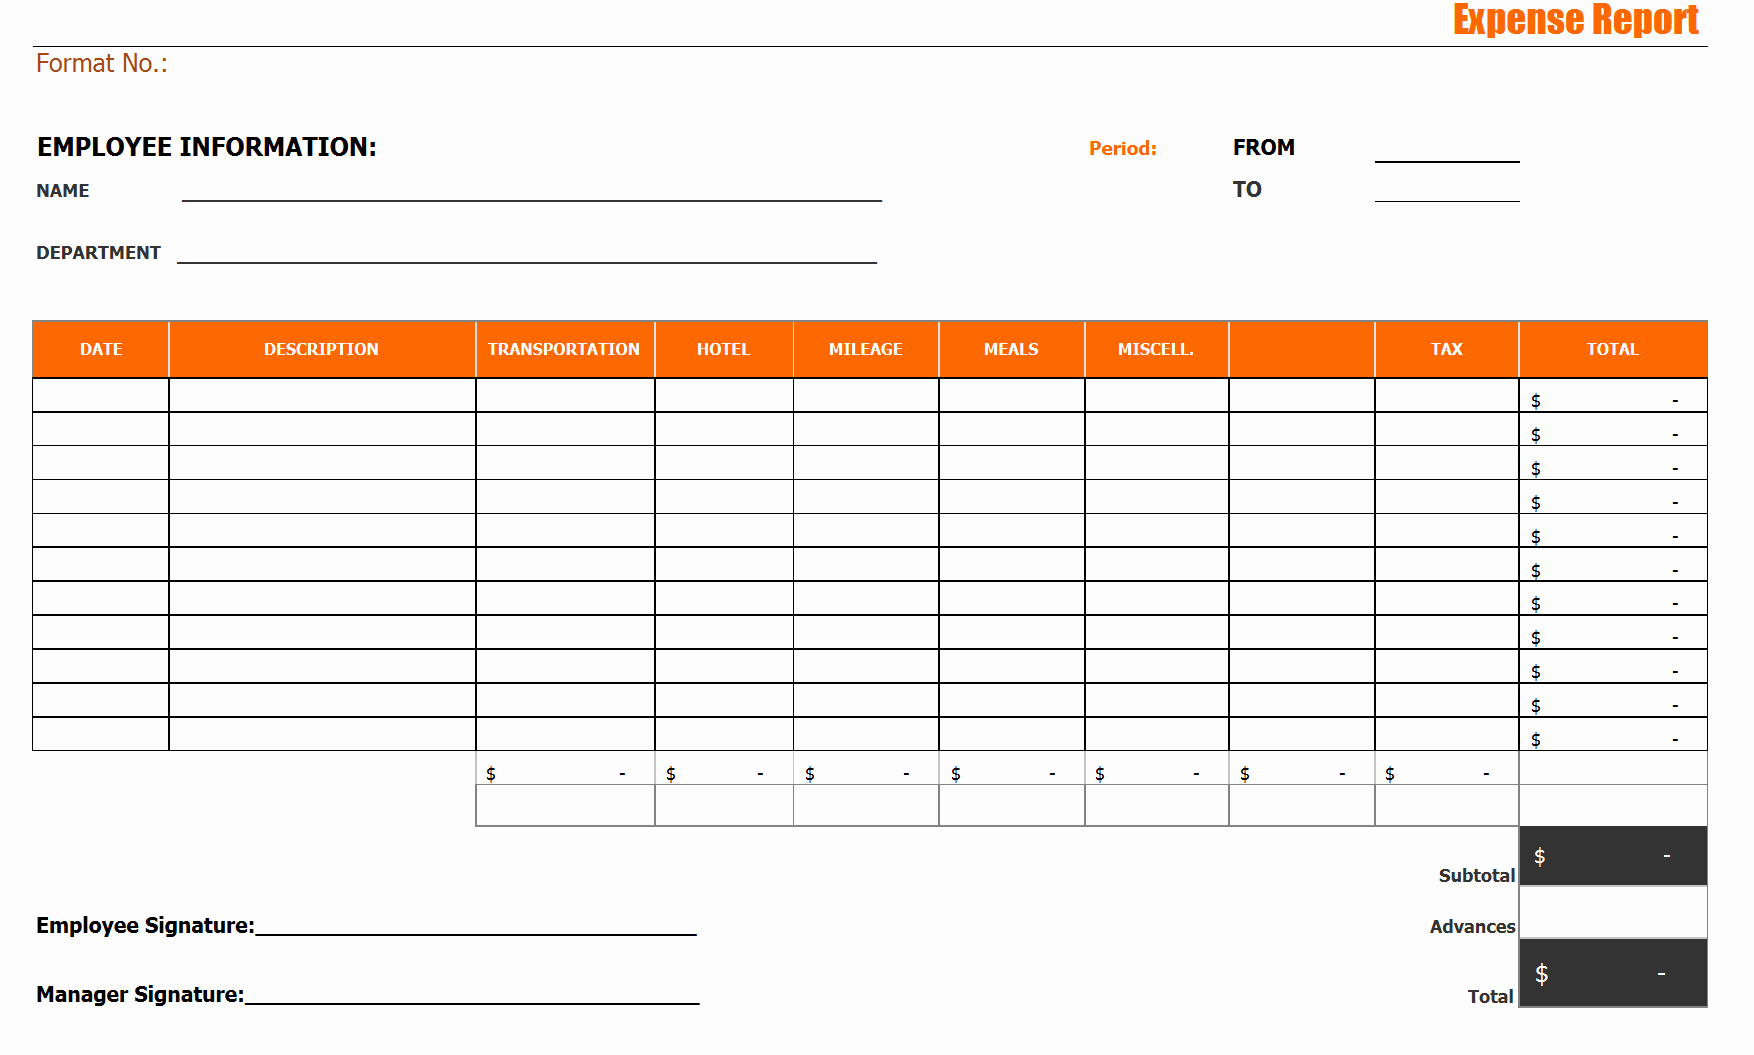 Exceptional Basic Expense Report form with orange Table